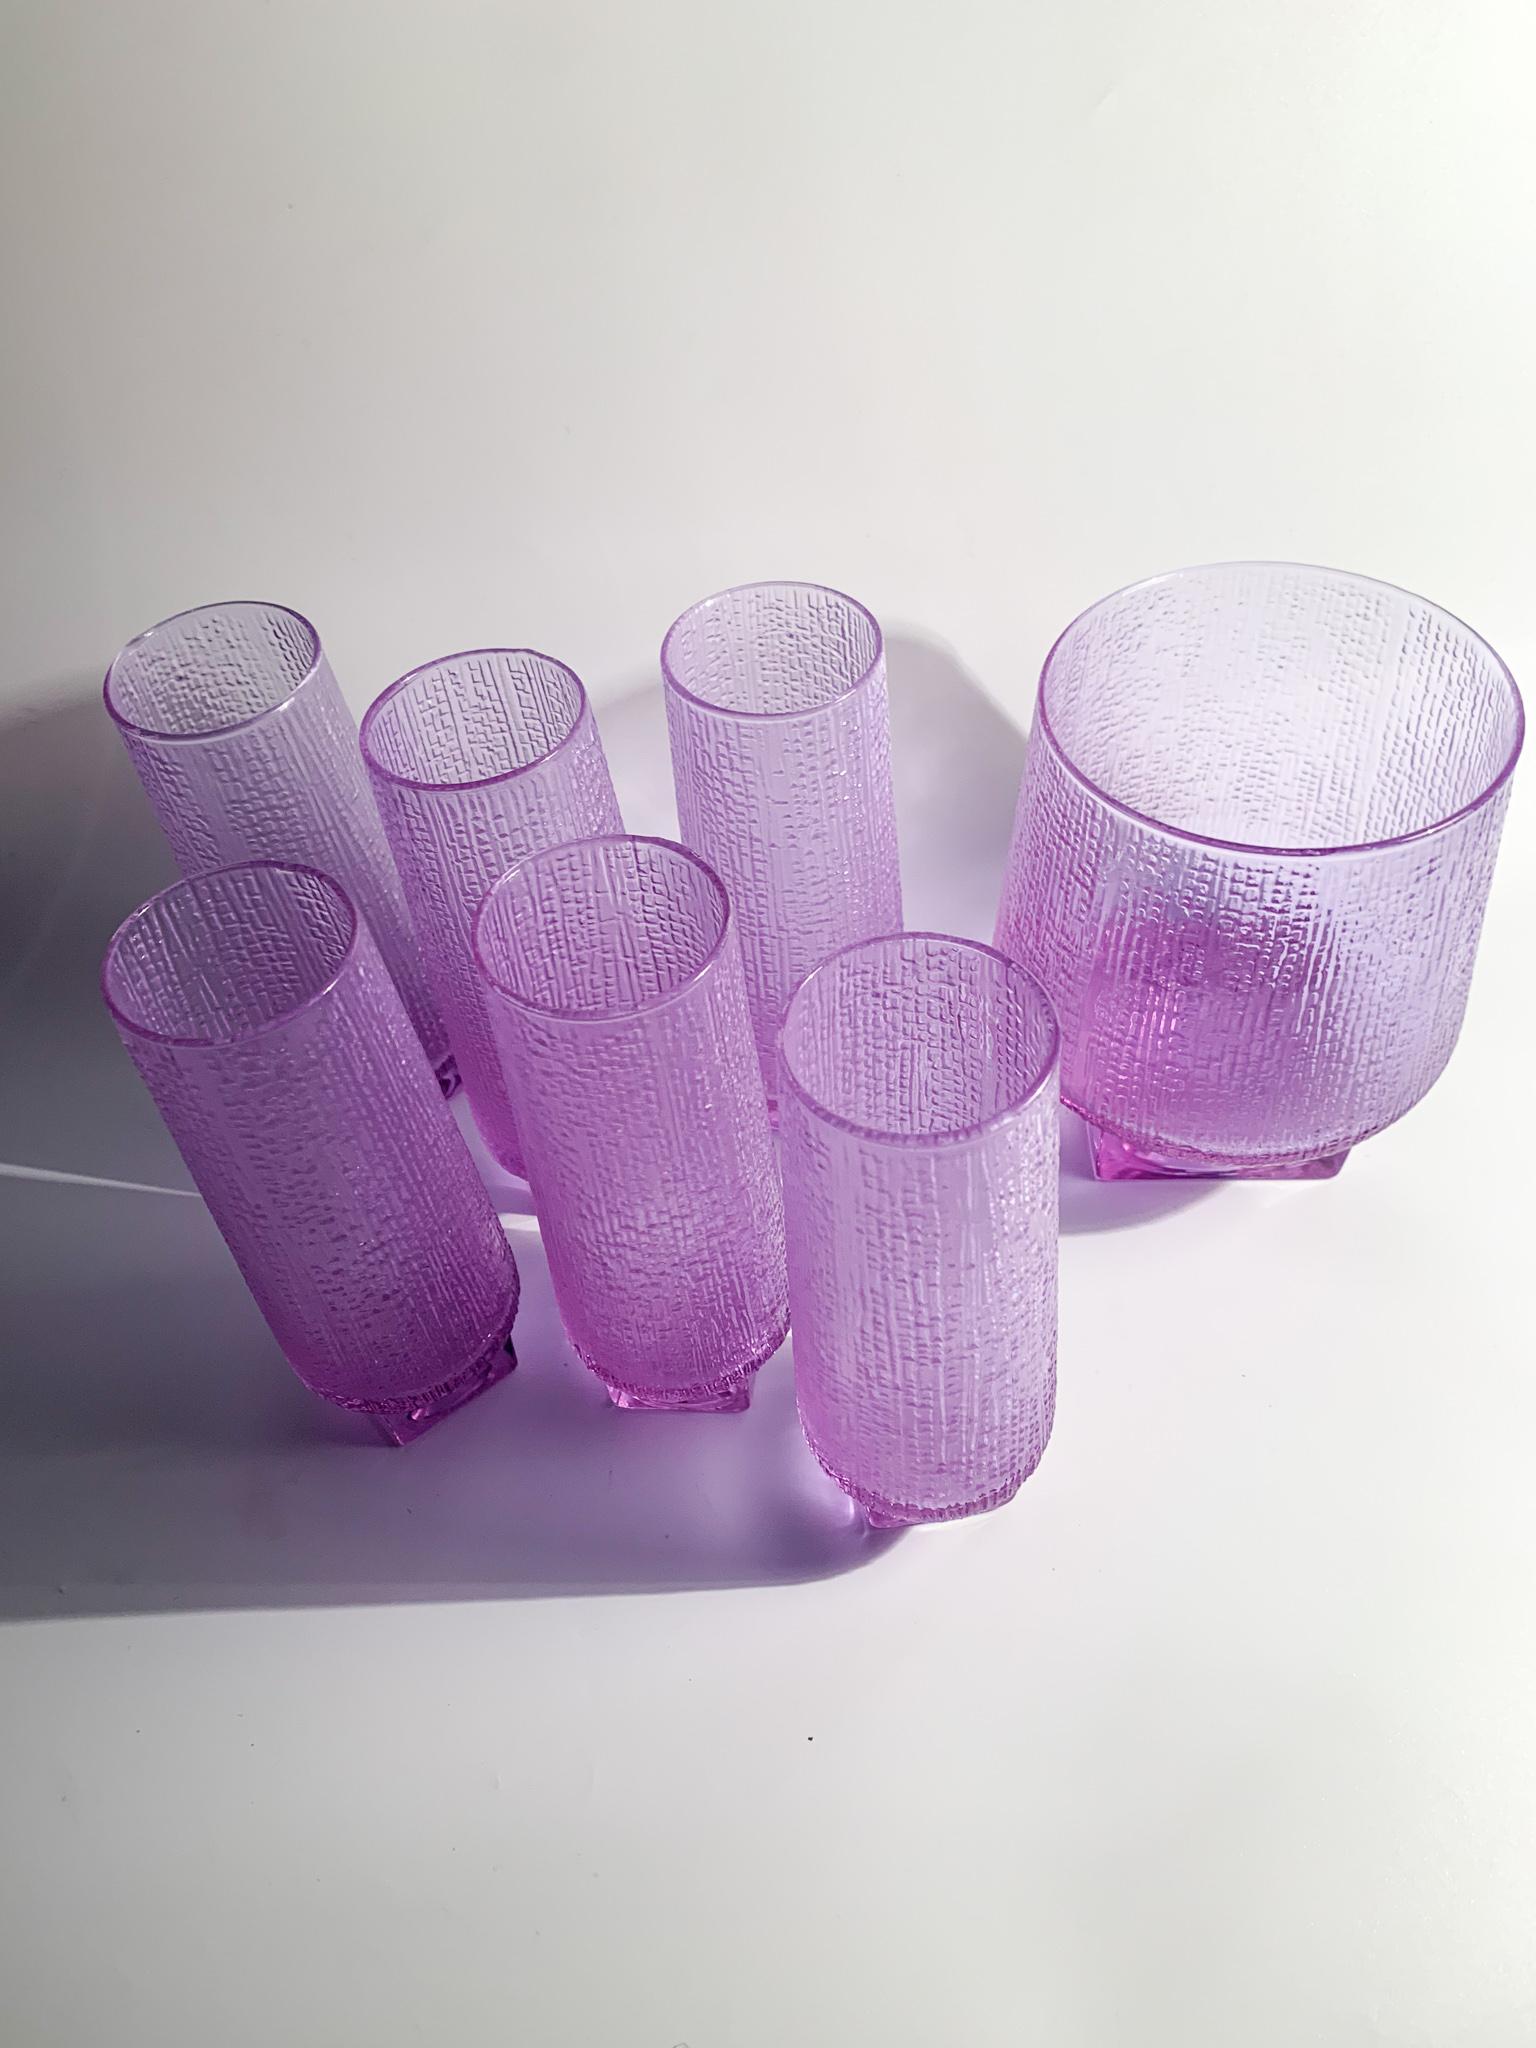 Set of 6 Alexandrite crystal liqueur / drink glasses with ice bucket, made by Tapioche Wirkkala Littala in the 1960s.

The Alexandrite crystal changes color depending on the light it is subjected to, from purple / lilac to light blue.

Glass - Ø